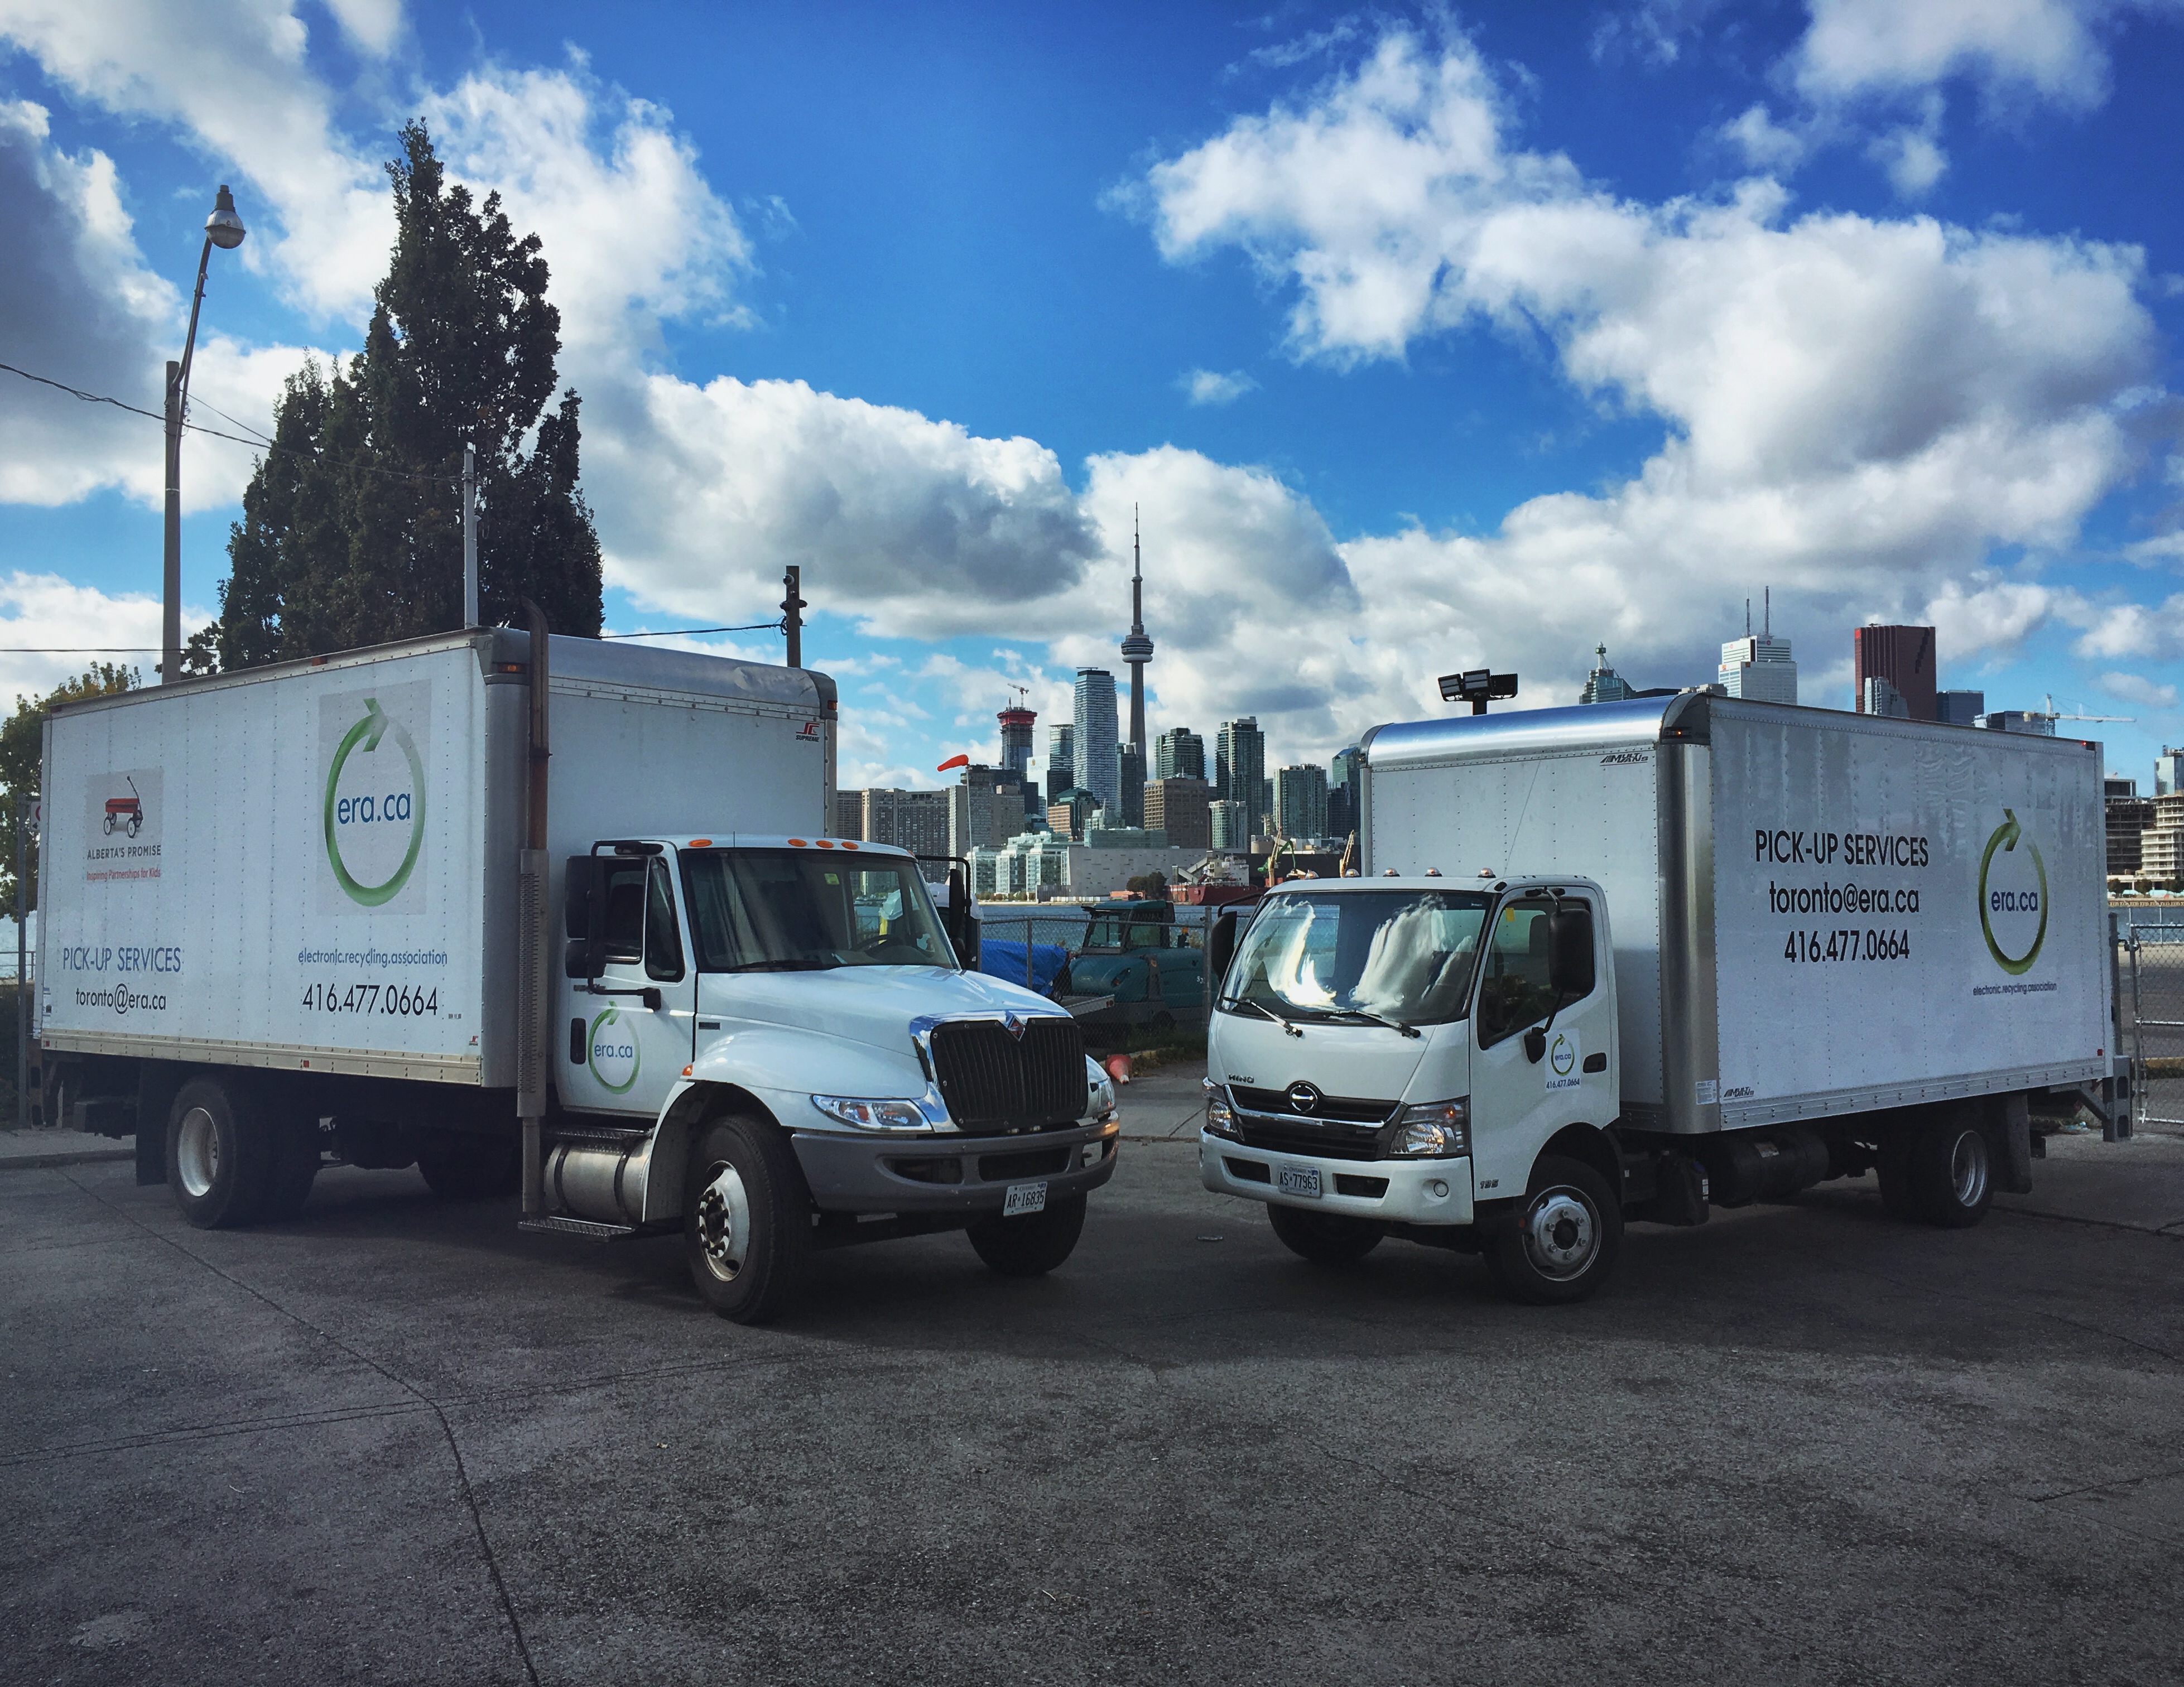 Electronic Recycling Locations | Electronic Recycling Association